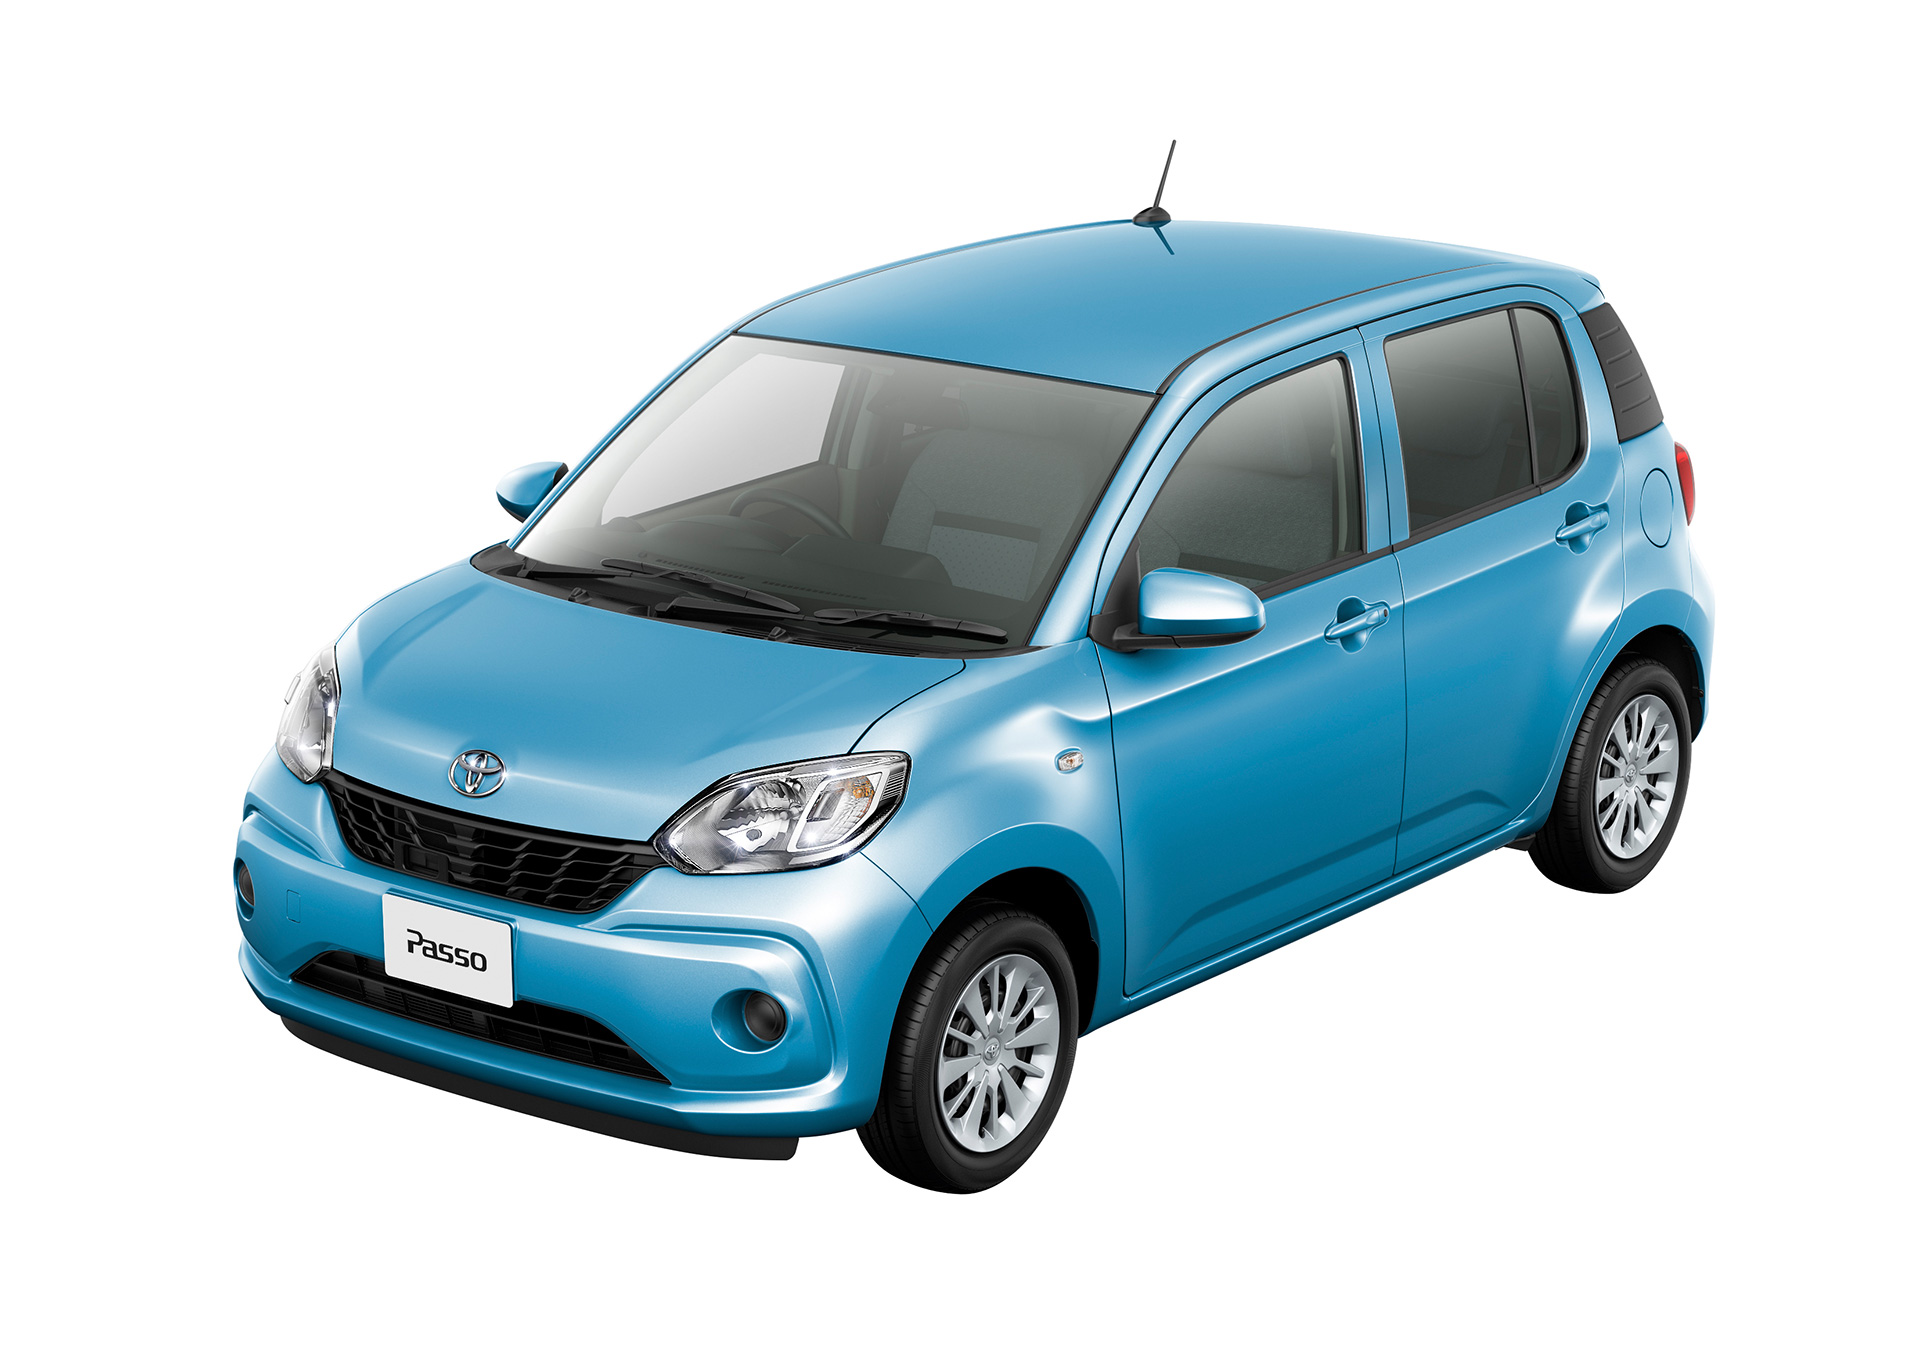 All-New Toyota Passo Goes on Sale in Japan - The News Wheel